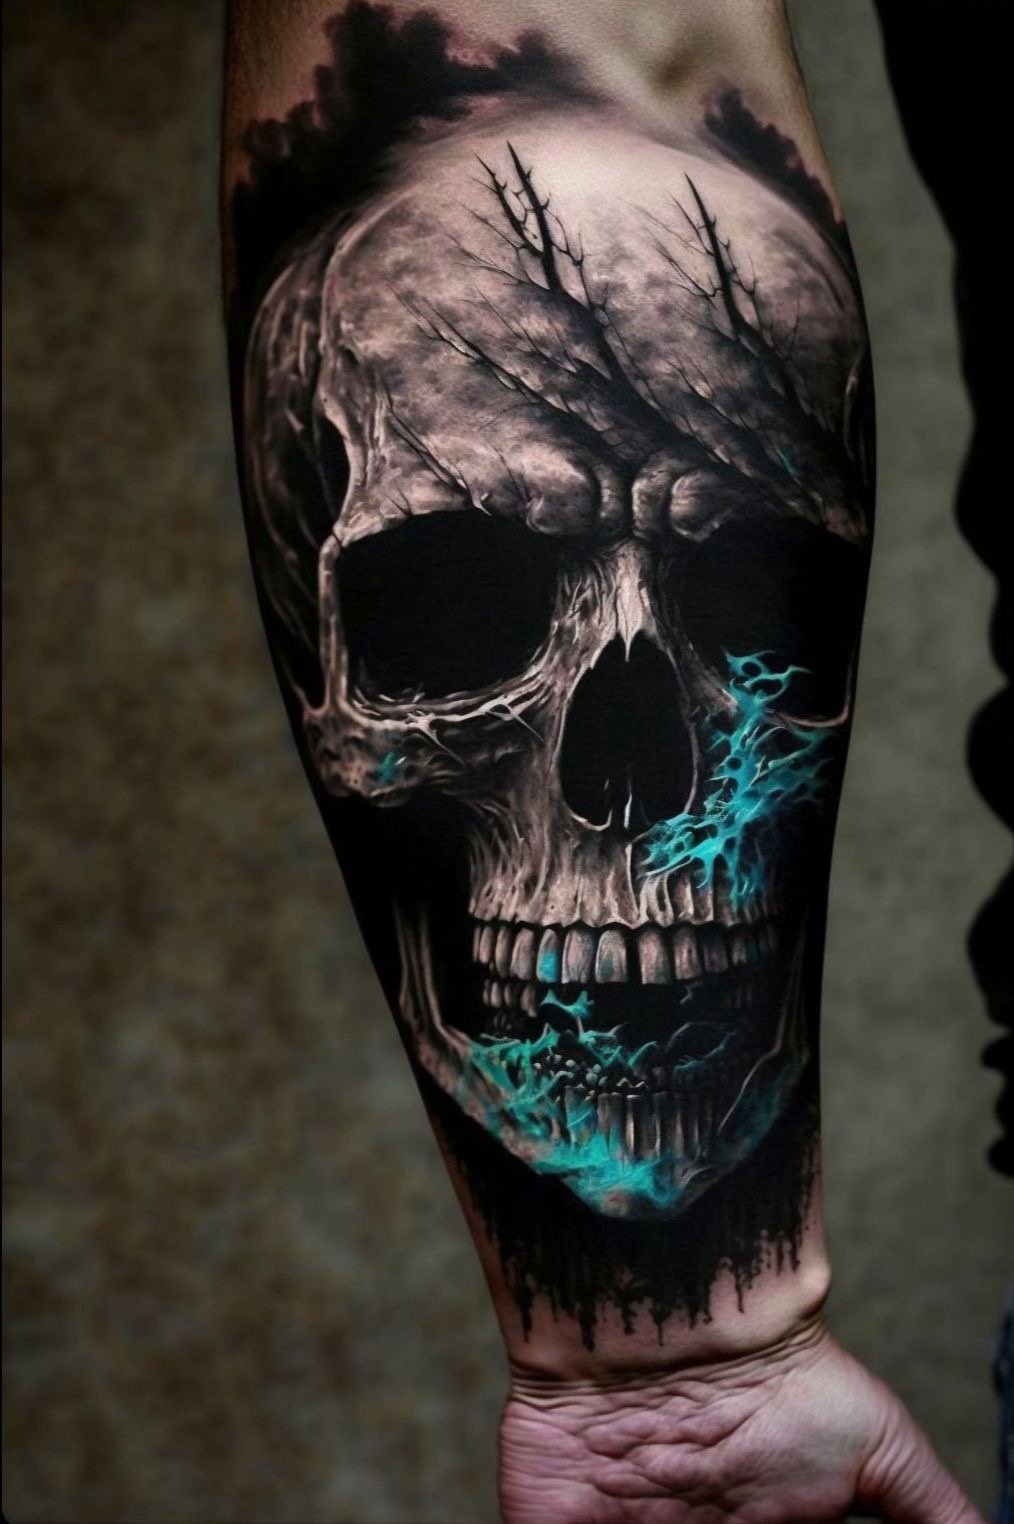 What Does A Black Sugar Skull Tattoo Symbolize? | 99inspiration